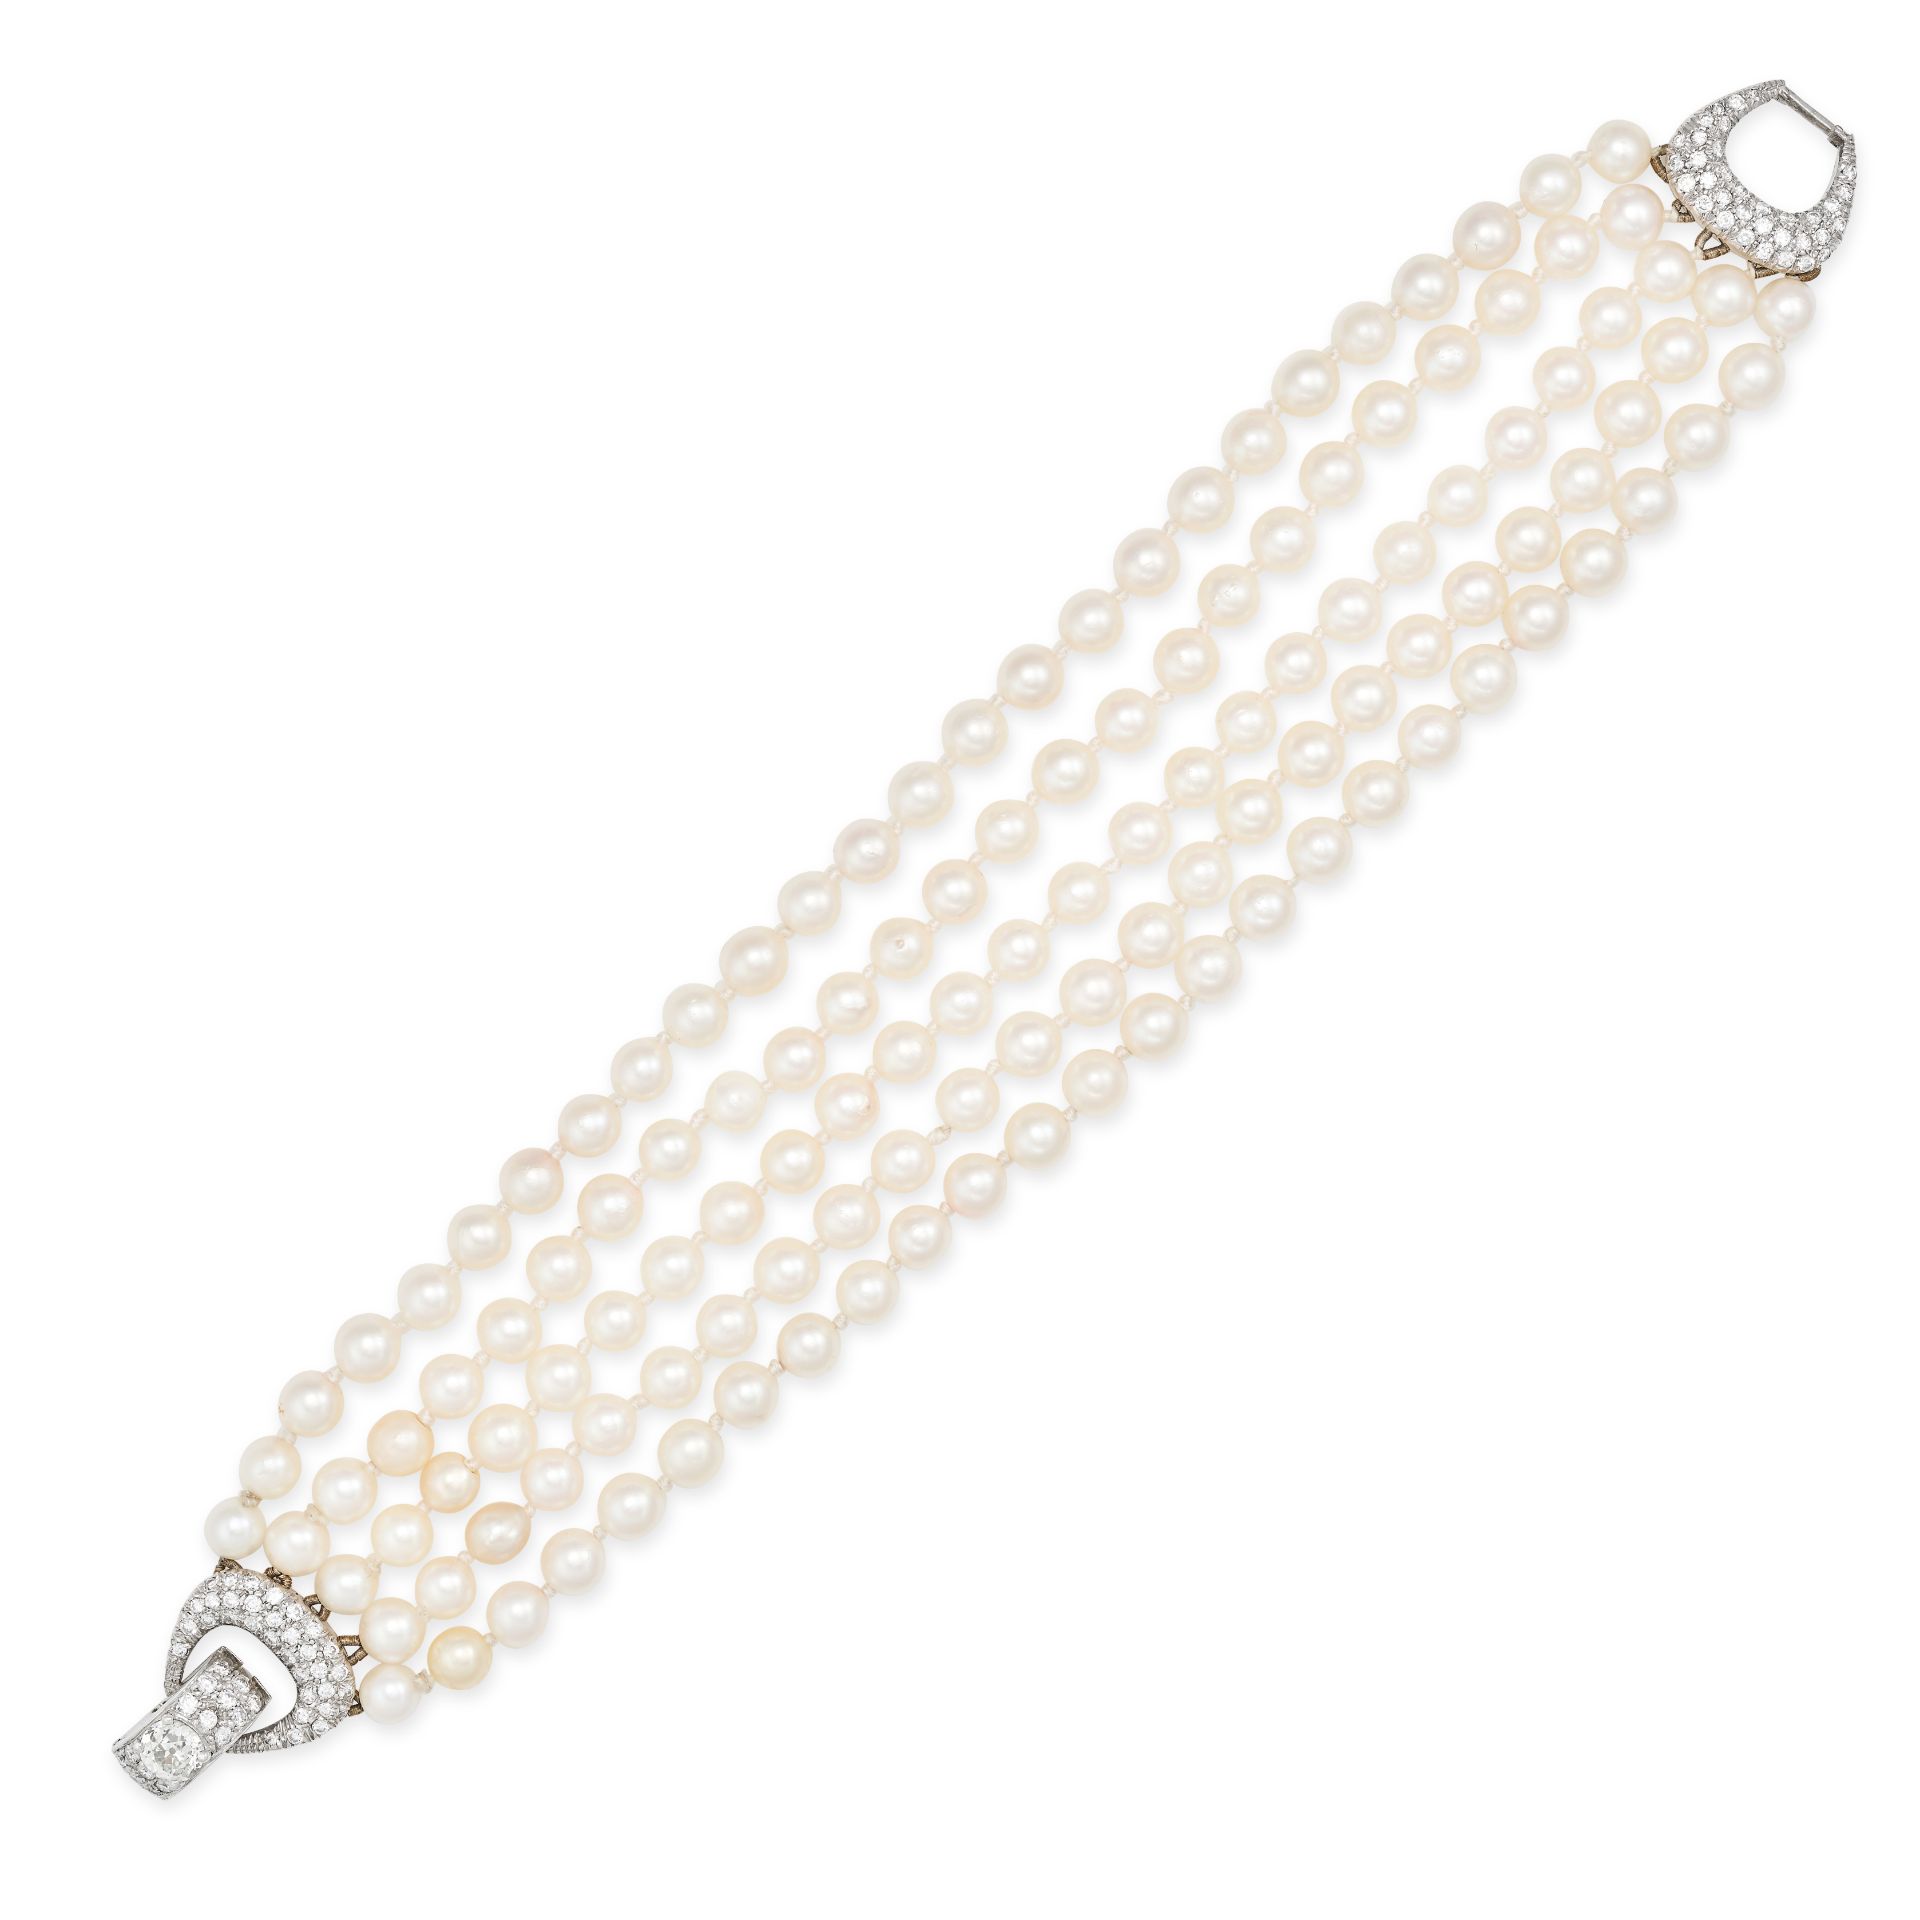 A FIVE ROW PEARL AND DIAMOND BRACELET comprising five rows of pearls, the openwork clasp designed...